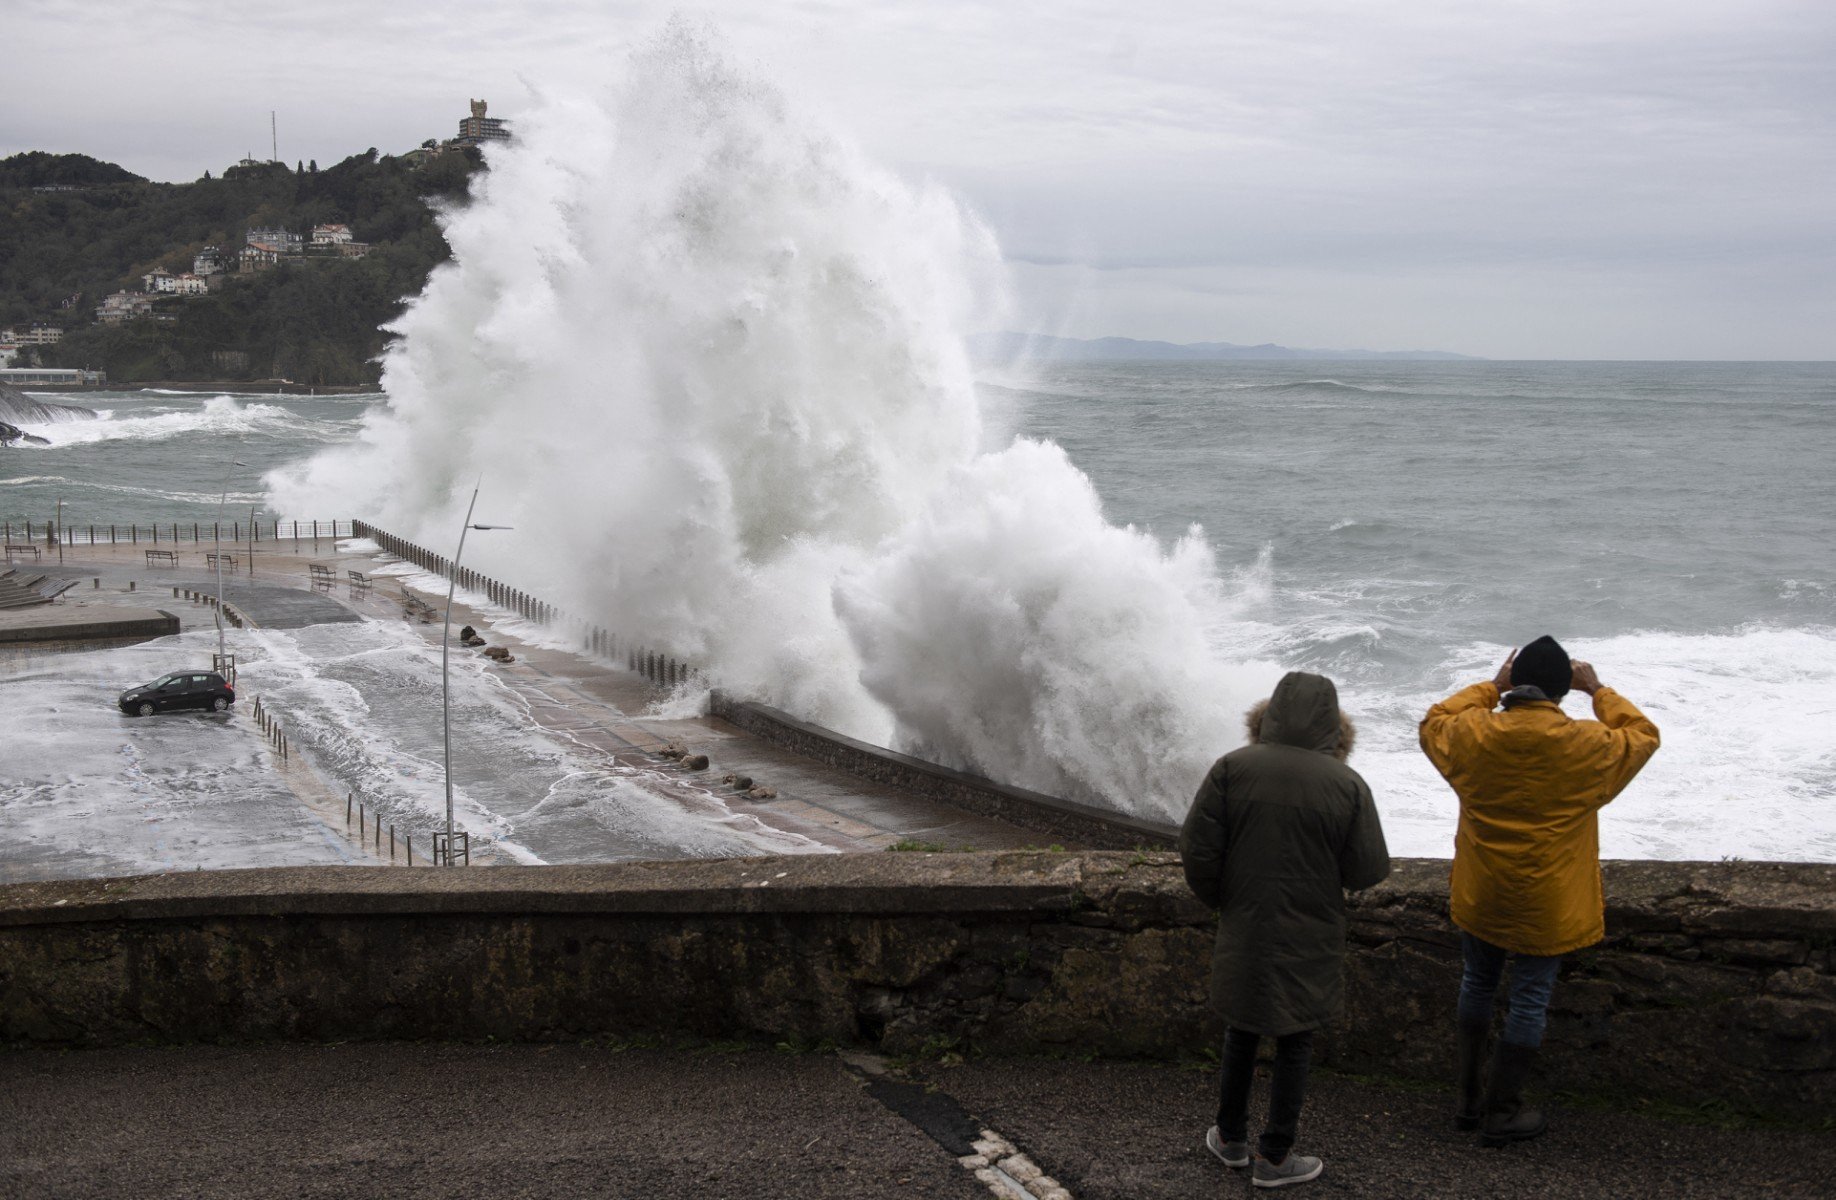 Two die after extreme weather in Spain as Storm Nelson hits thumbnail